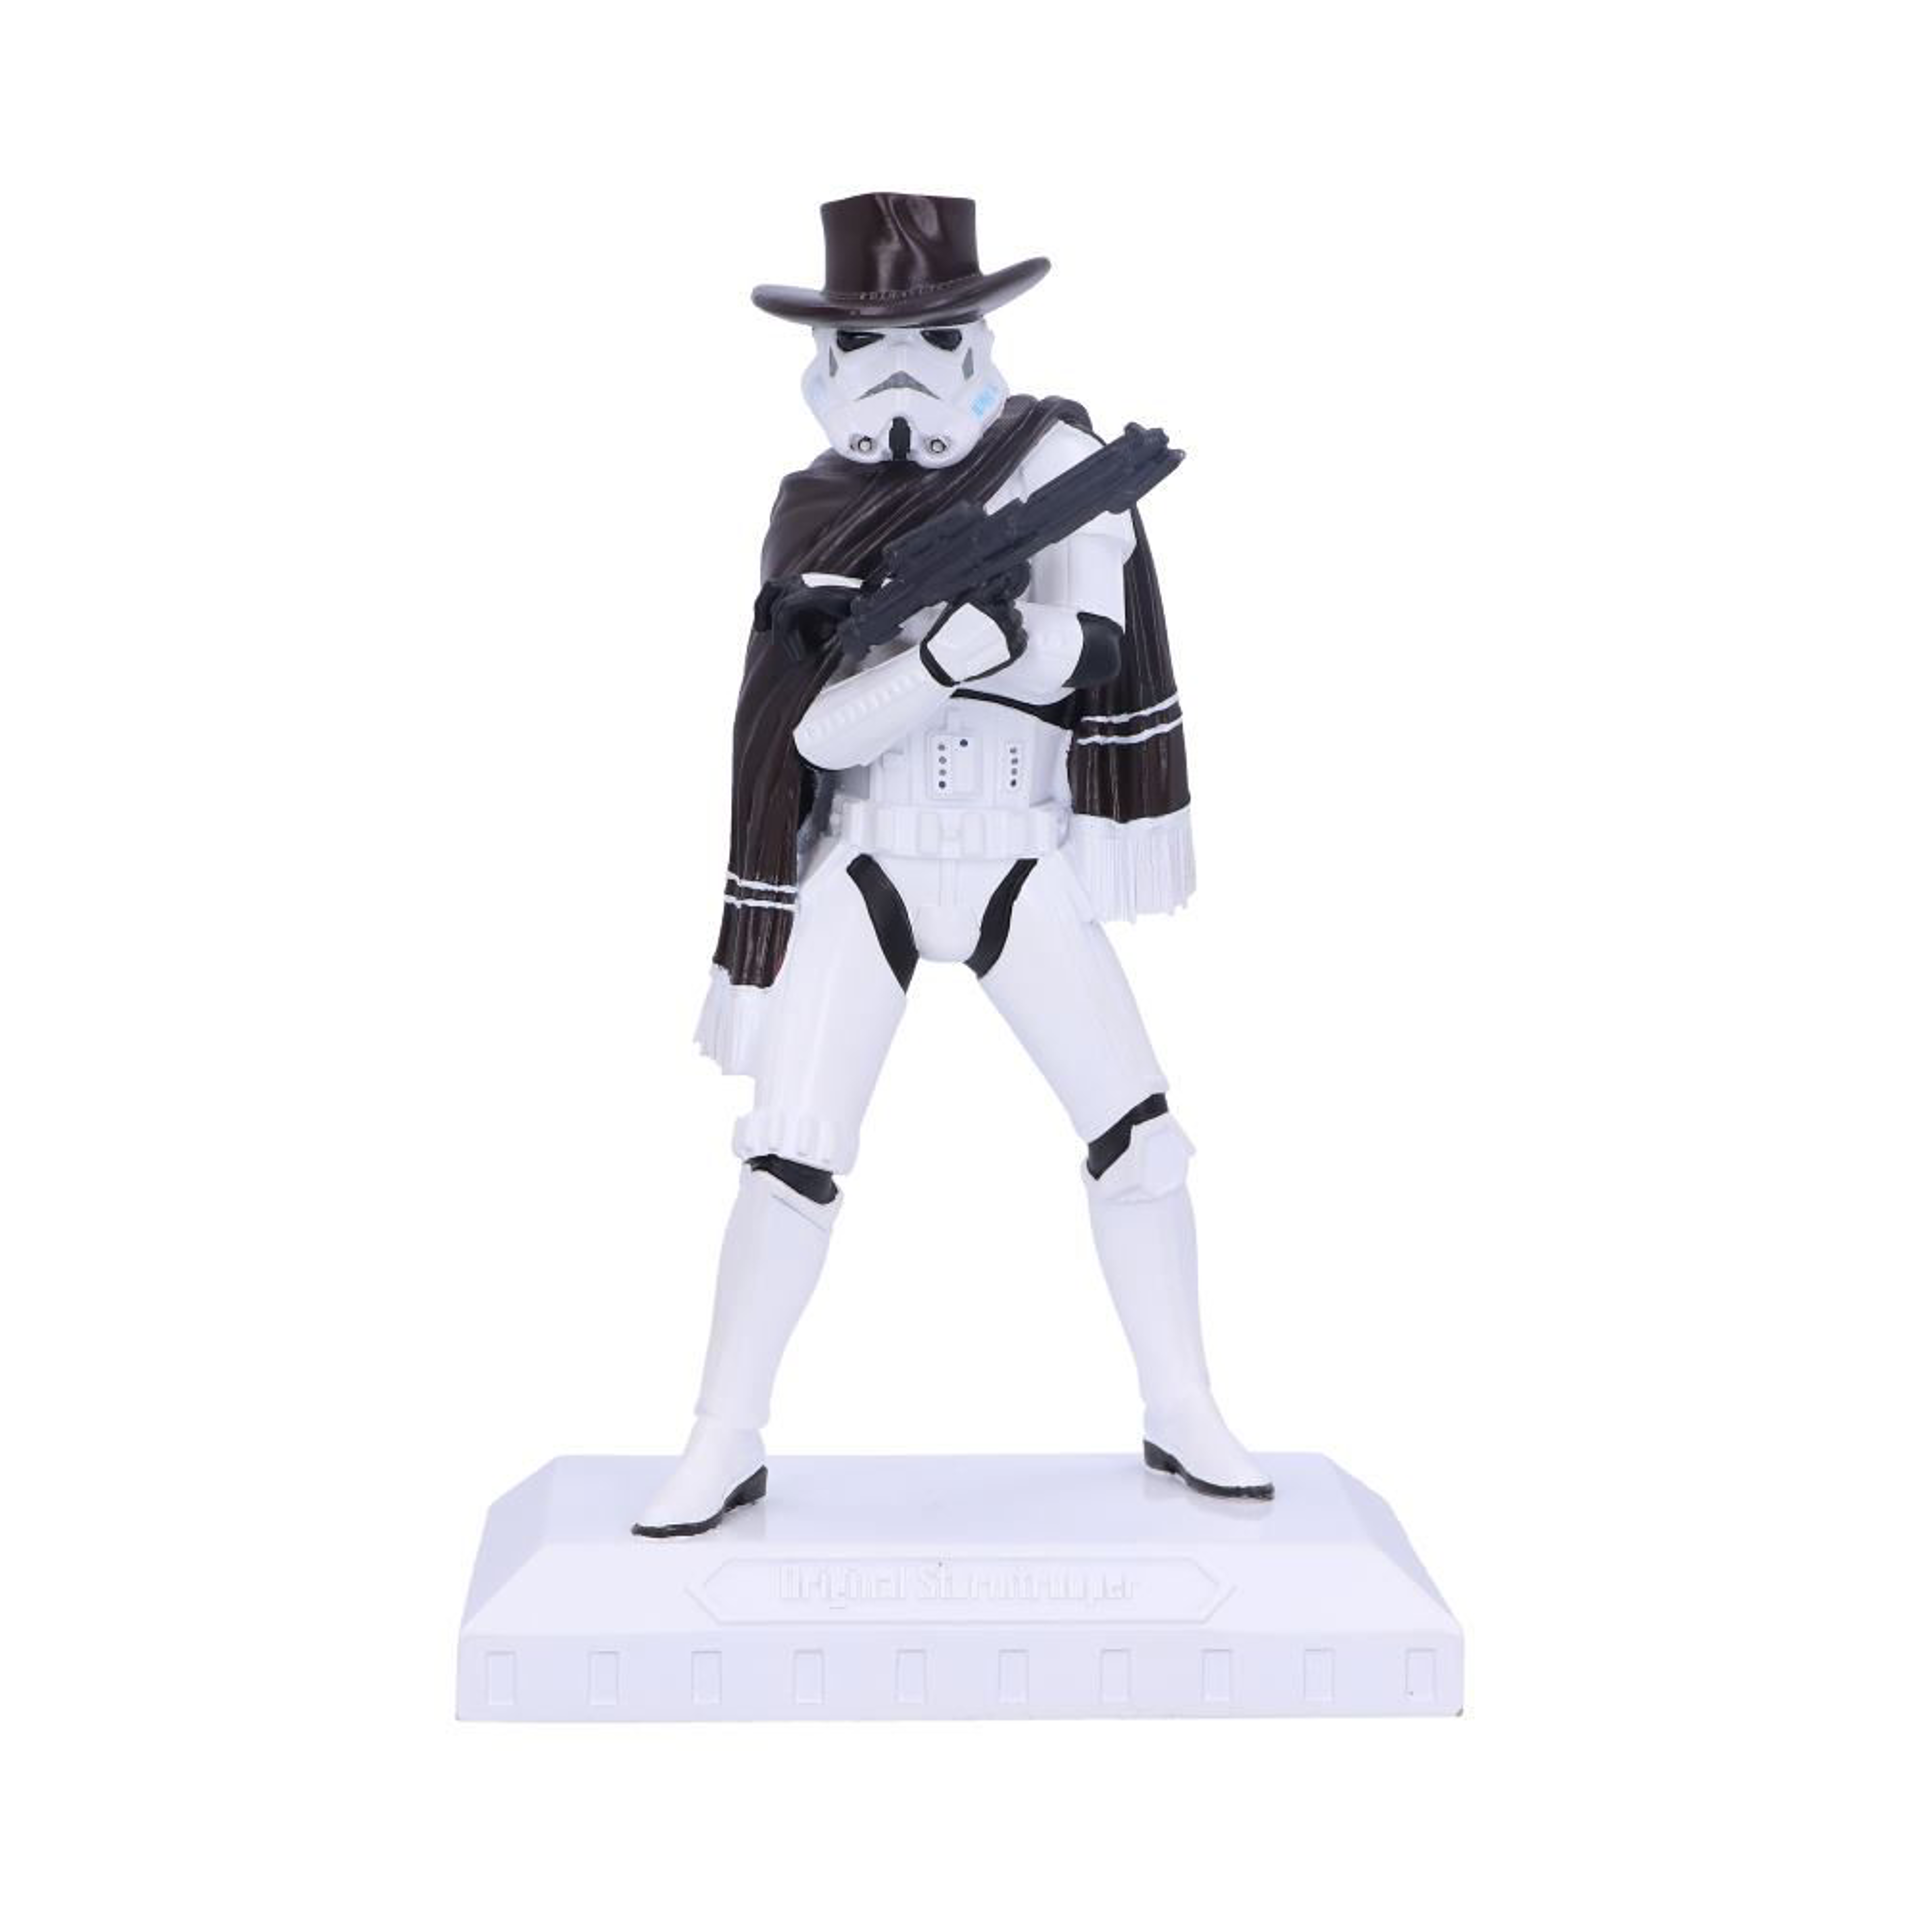 Star Wars - Figurine Stormtrooper "The Good,The Bad and The Trooper" 18cm